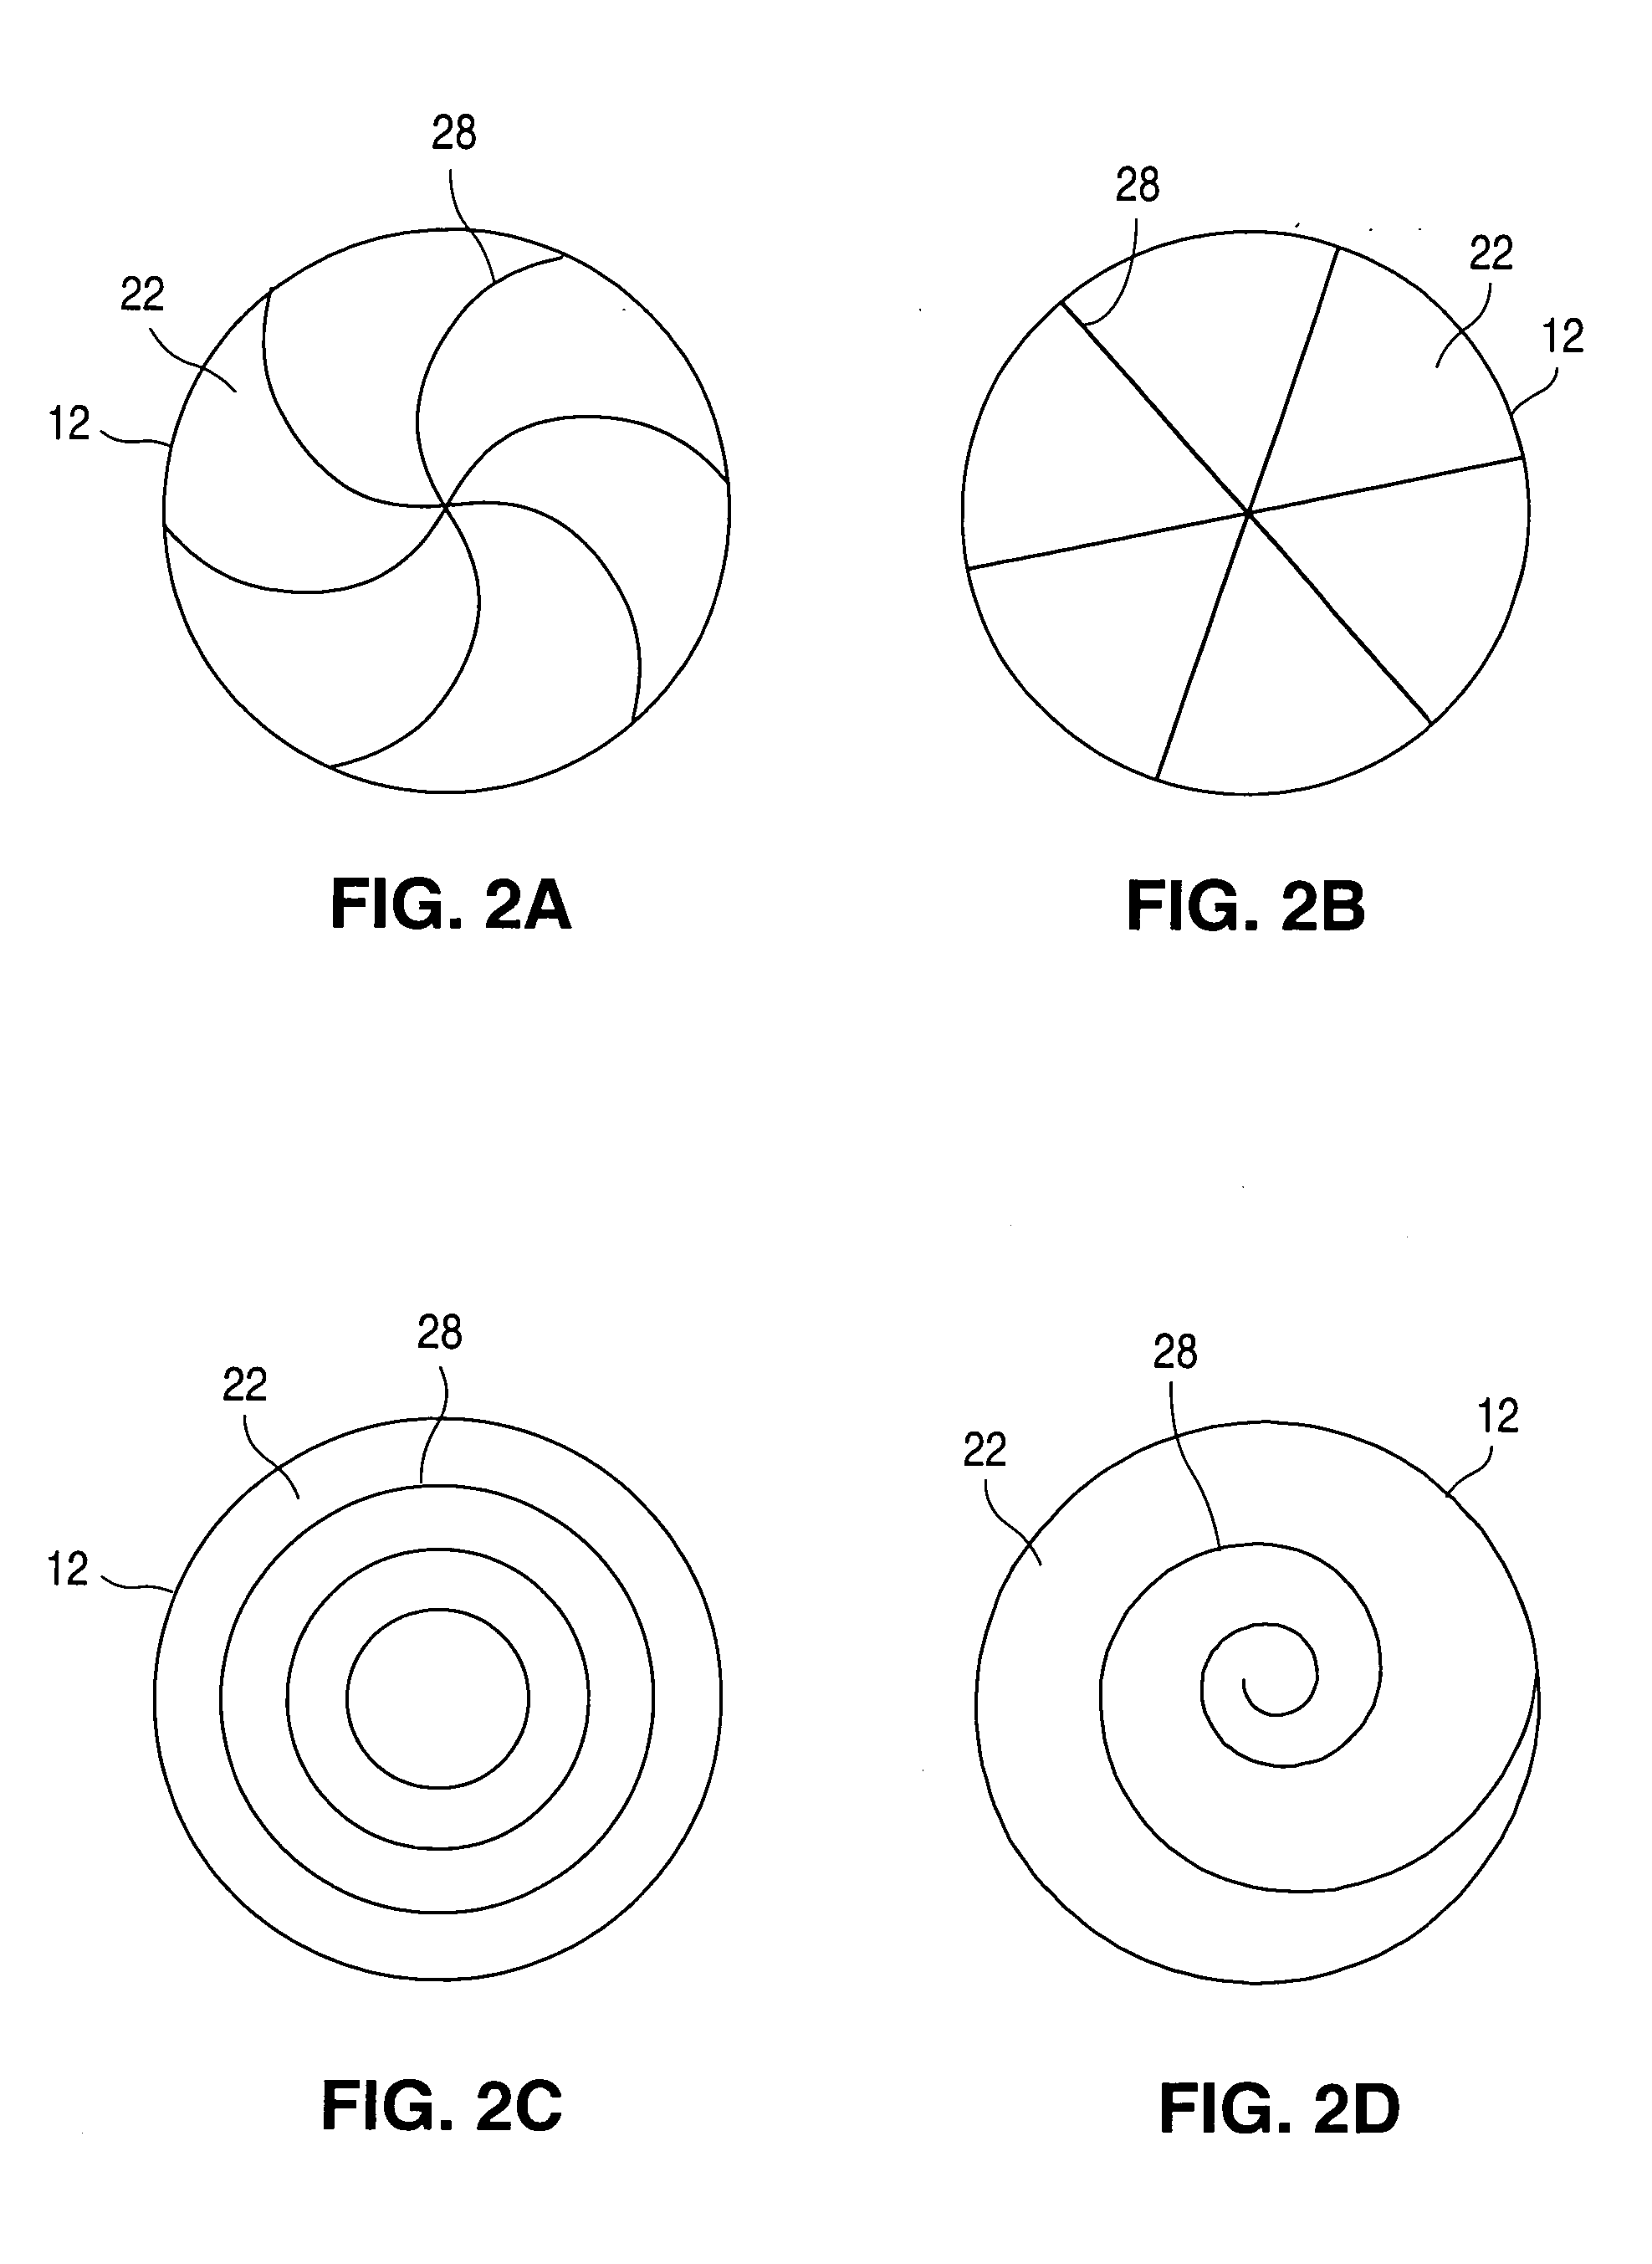 Method of coating implantable medical devices